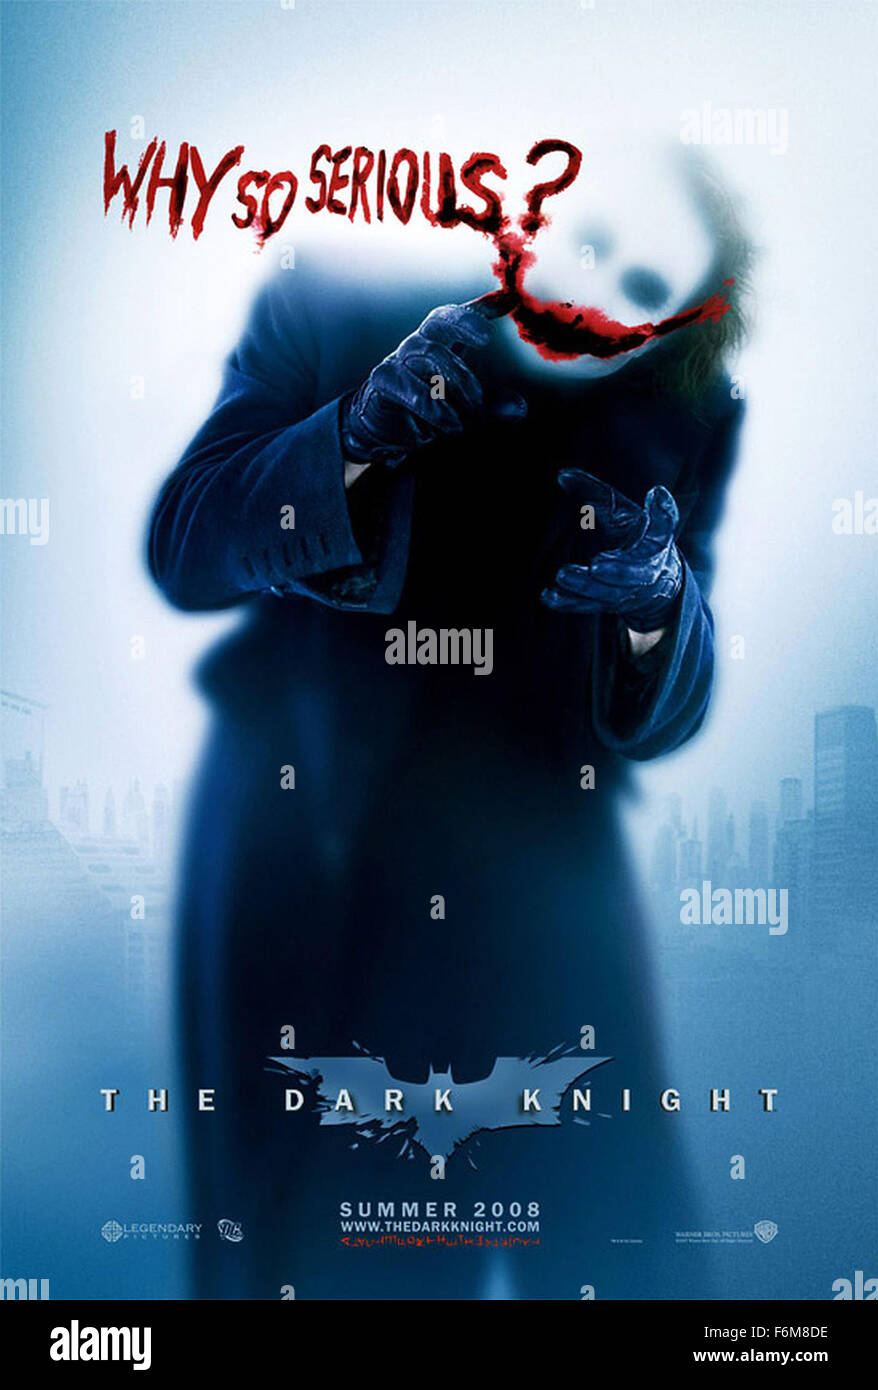 RELEASE DATE: July 18, 2008. MOVIE TITLE: The Dark Knight. STUDIO: DC Comics and Legendary Pictures. PLOT: Batman and James Gordon join forces with Gotham's new District Attorney, Harvey Dent, to take on a psychotic bank robber known as The Joker, whilst other forces plot against them, and Joker's crimes grow more and more deadly. PICTURED: Movie Poster. Stock Photo